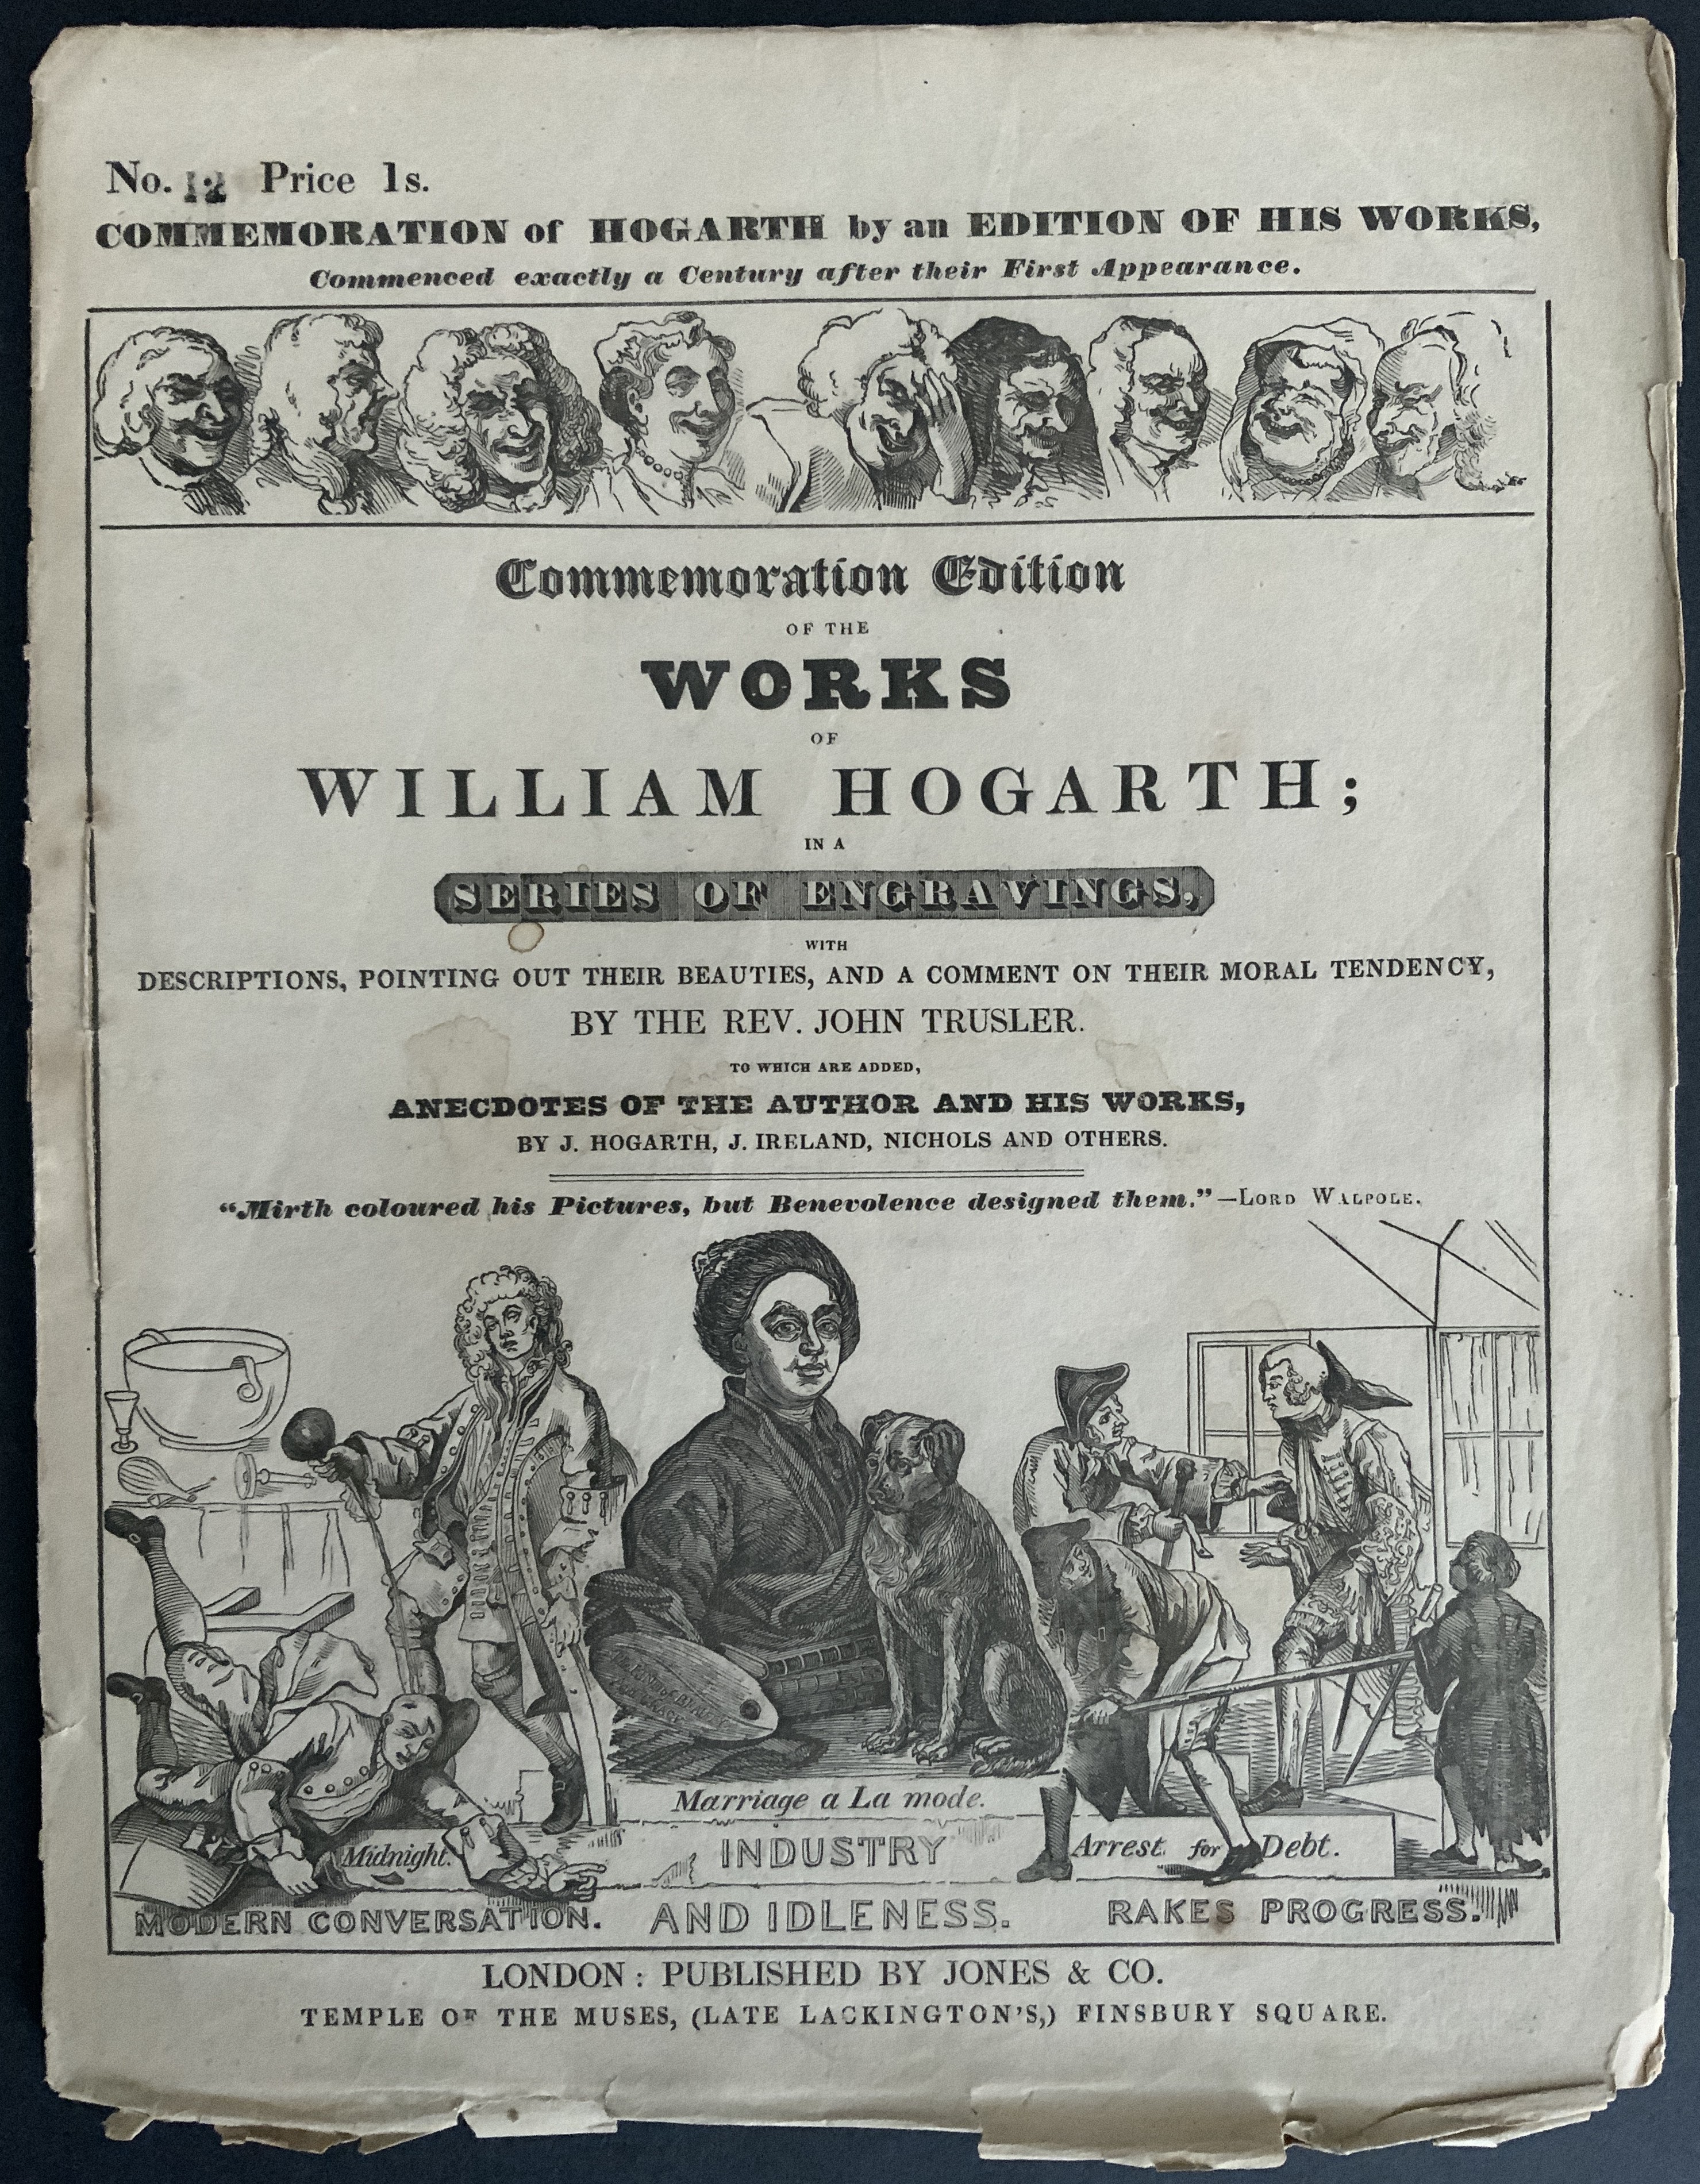 FOUR MAGAZINES OF COMMEMORATION EDITION OF THE WORKS OF WILLIAM HOGARTH IN THE SERIES OF ENGRAVINGS - Image 3 of 8